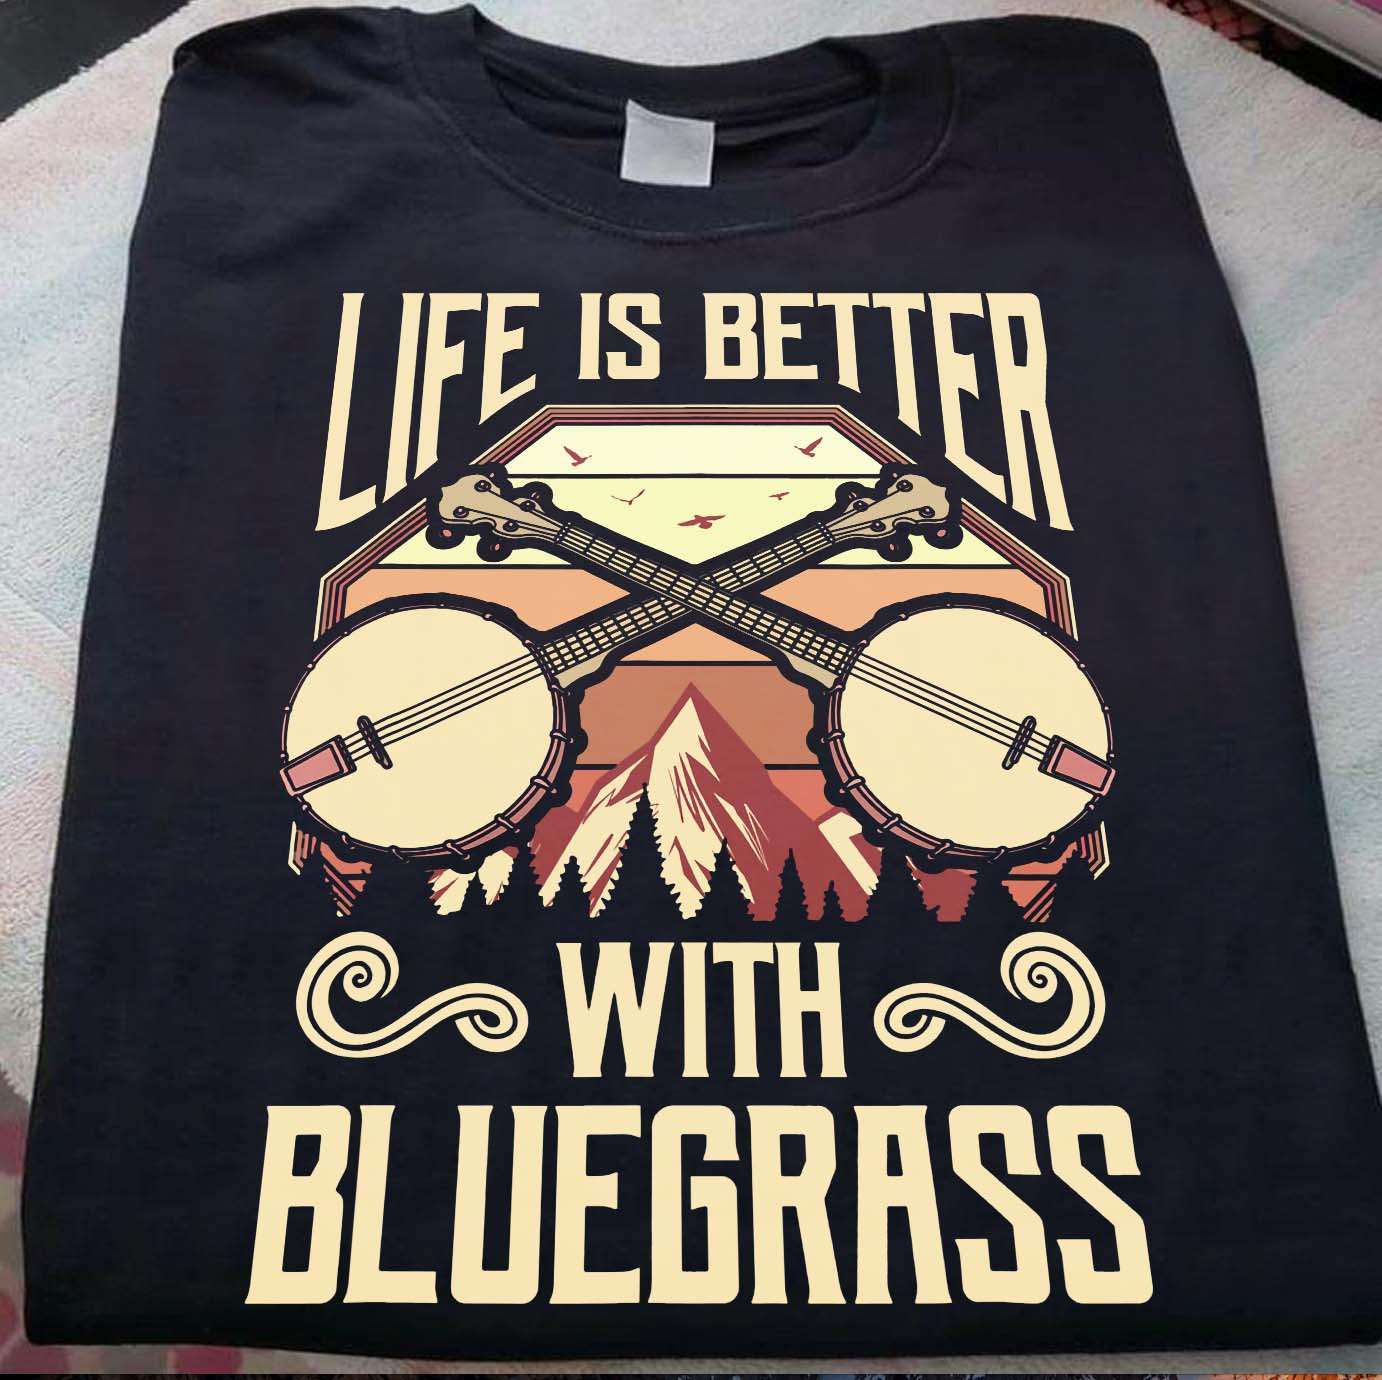 Banjo Guitar - Life is better with bluegrass